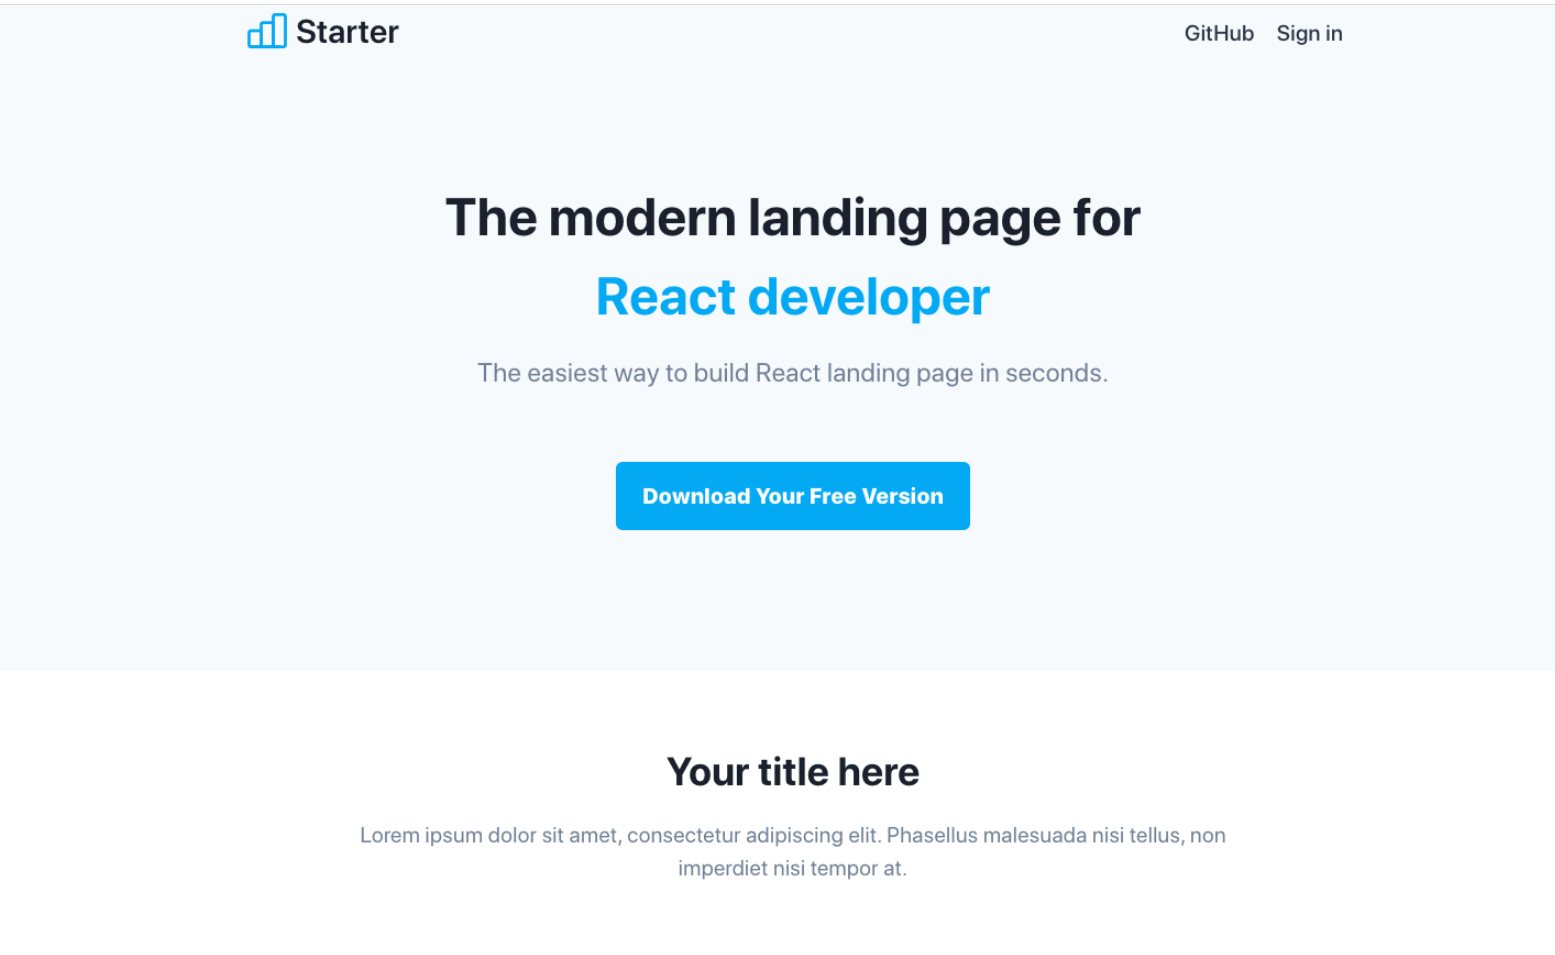 13 Open-source Next.js Landing Page Templates and Starters